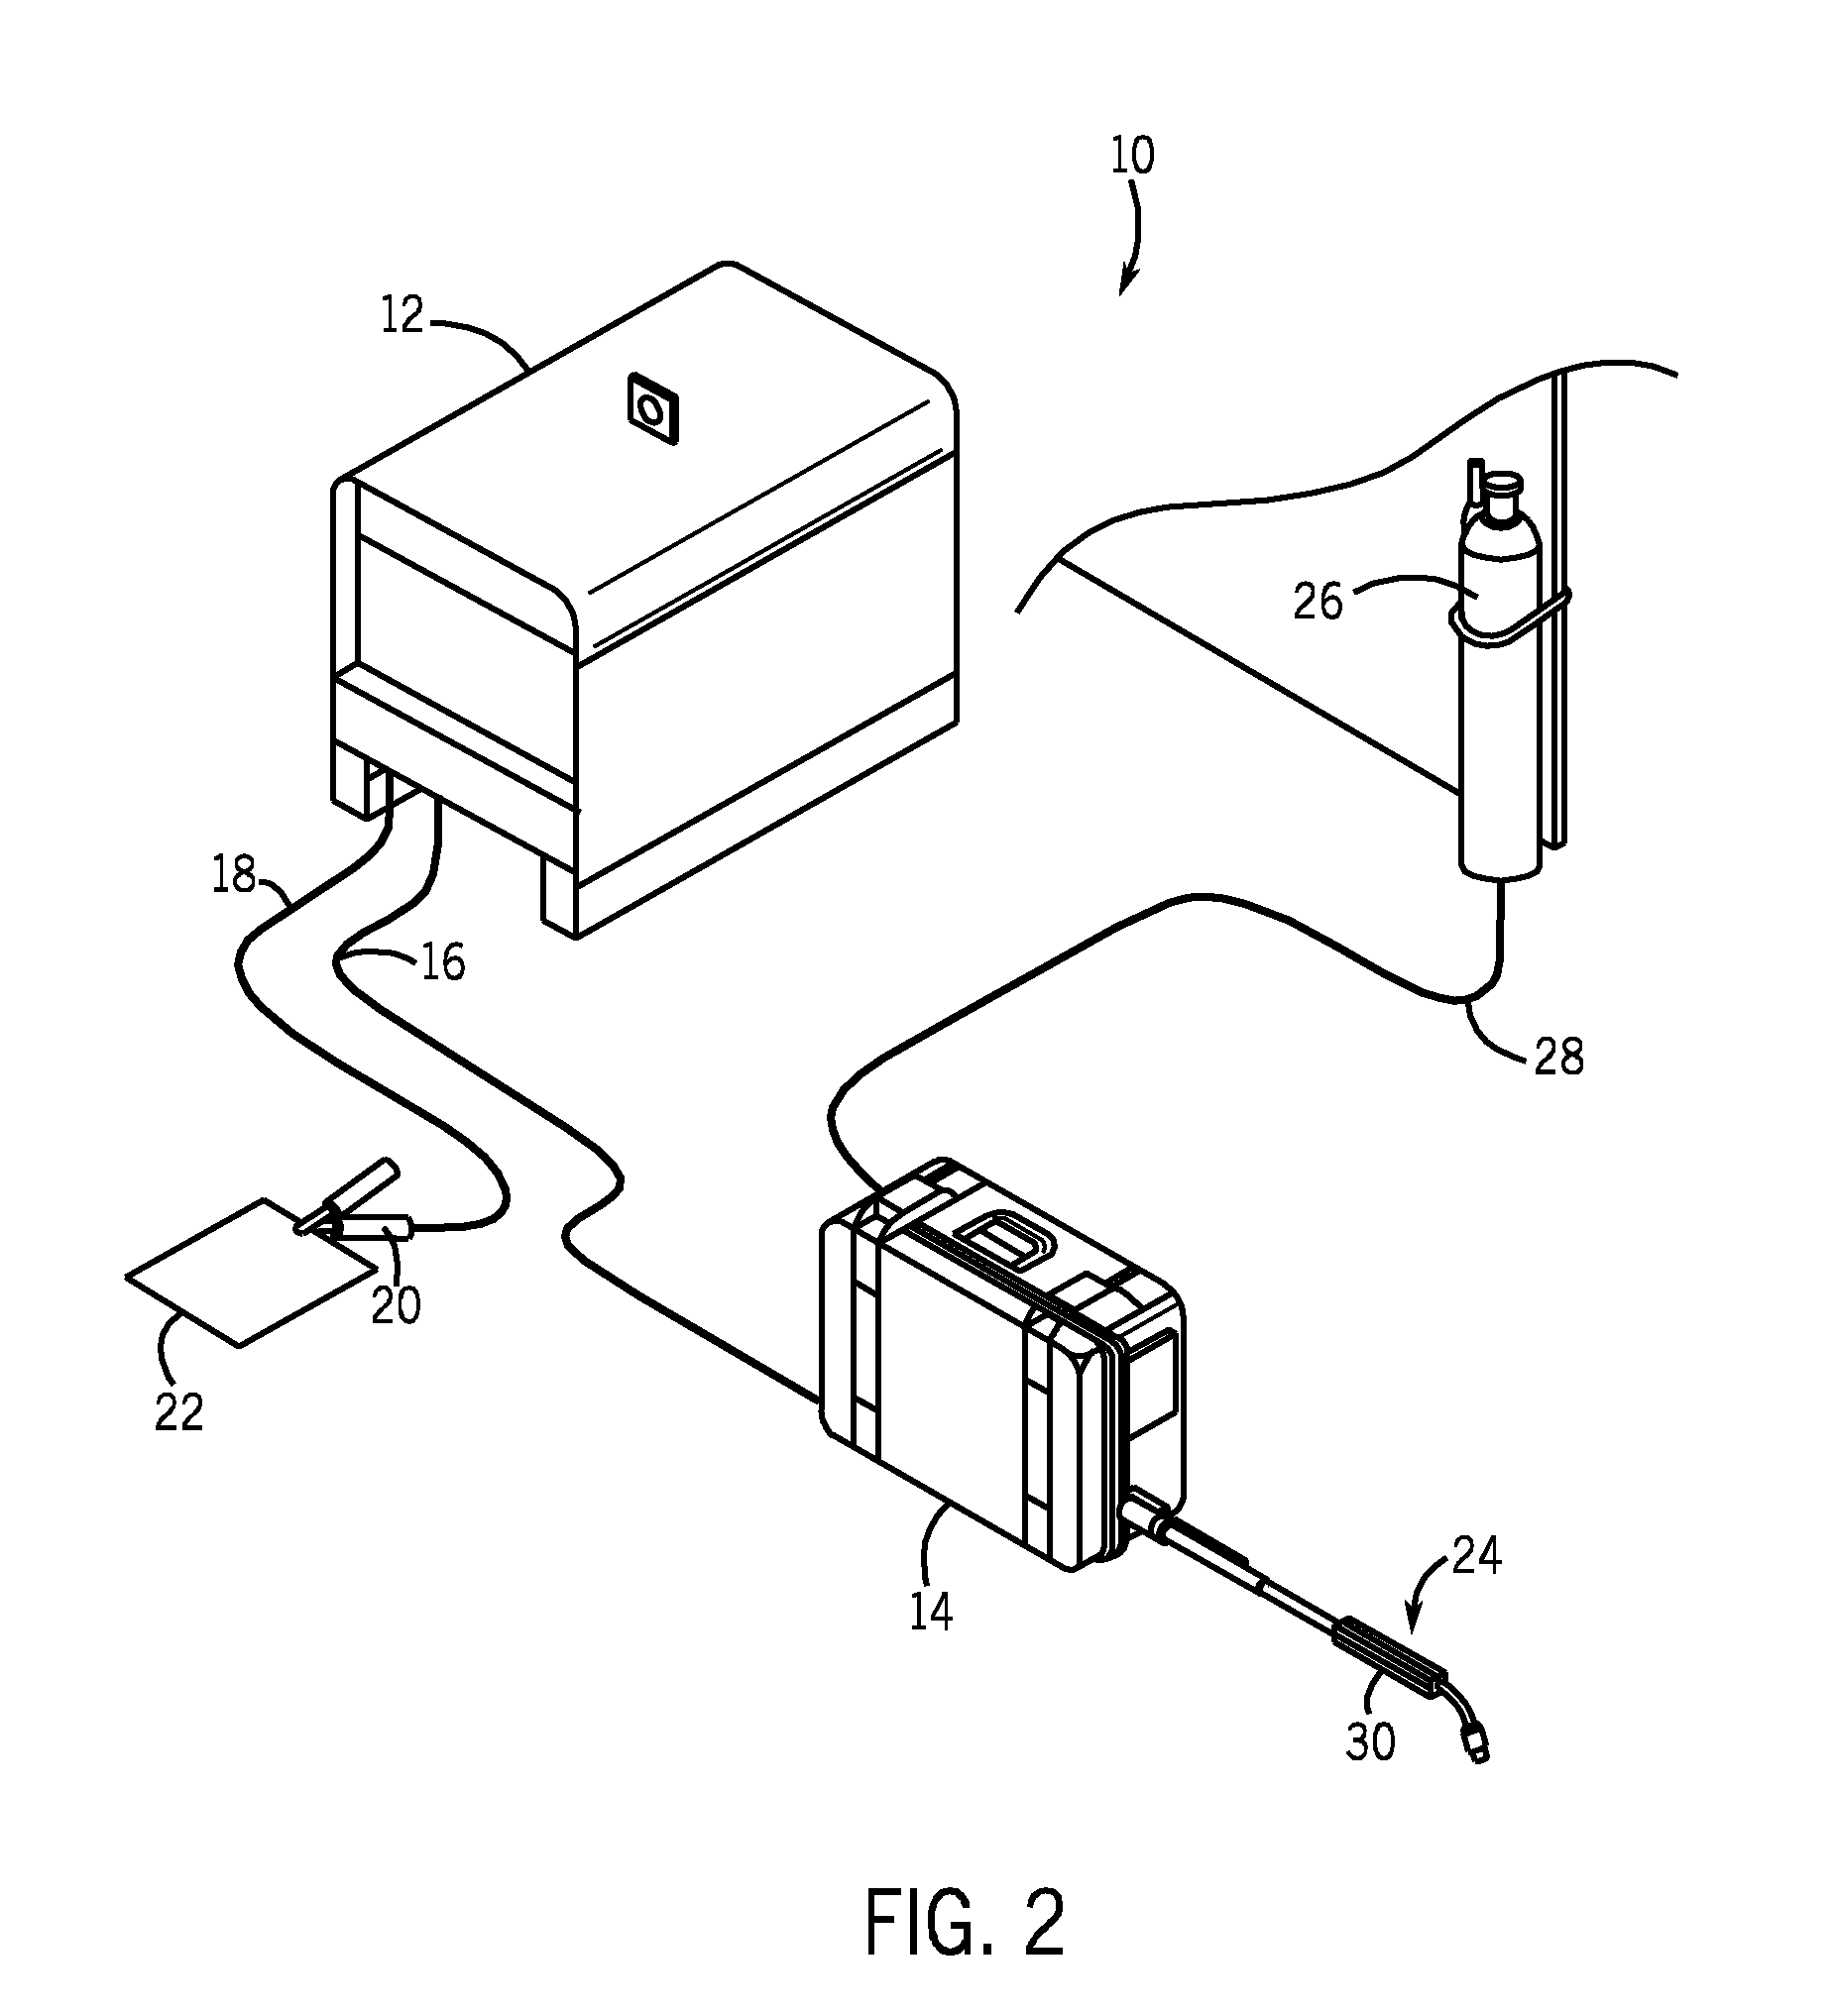 Remote wire feeder using binary phase shift keying to modulate communications of command/control signals to be transmitted over a weld cable